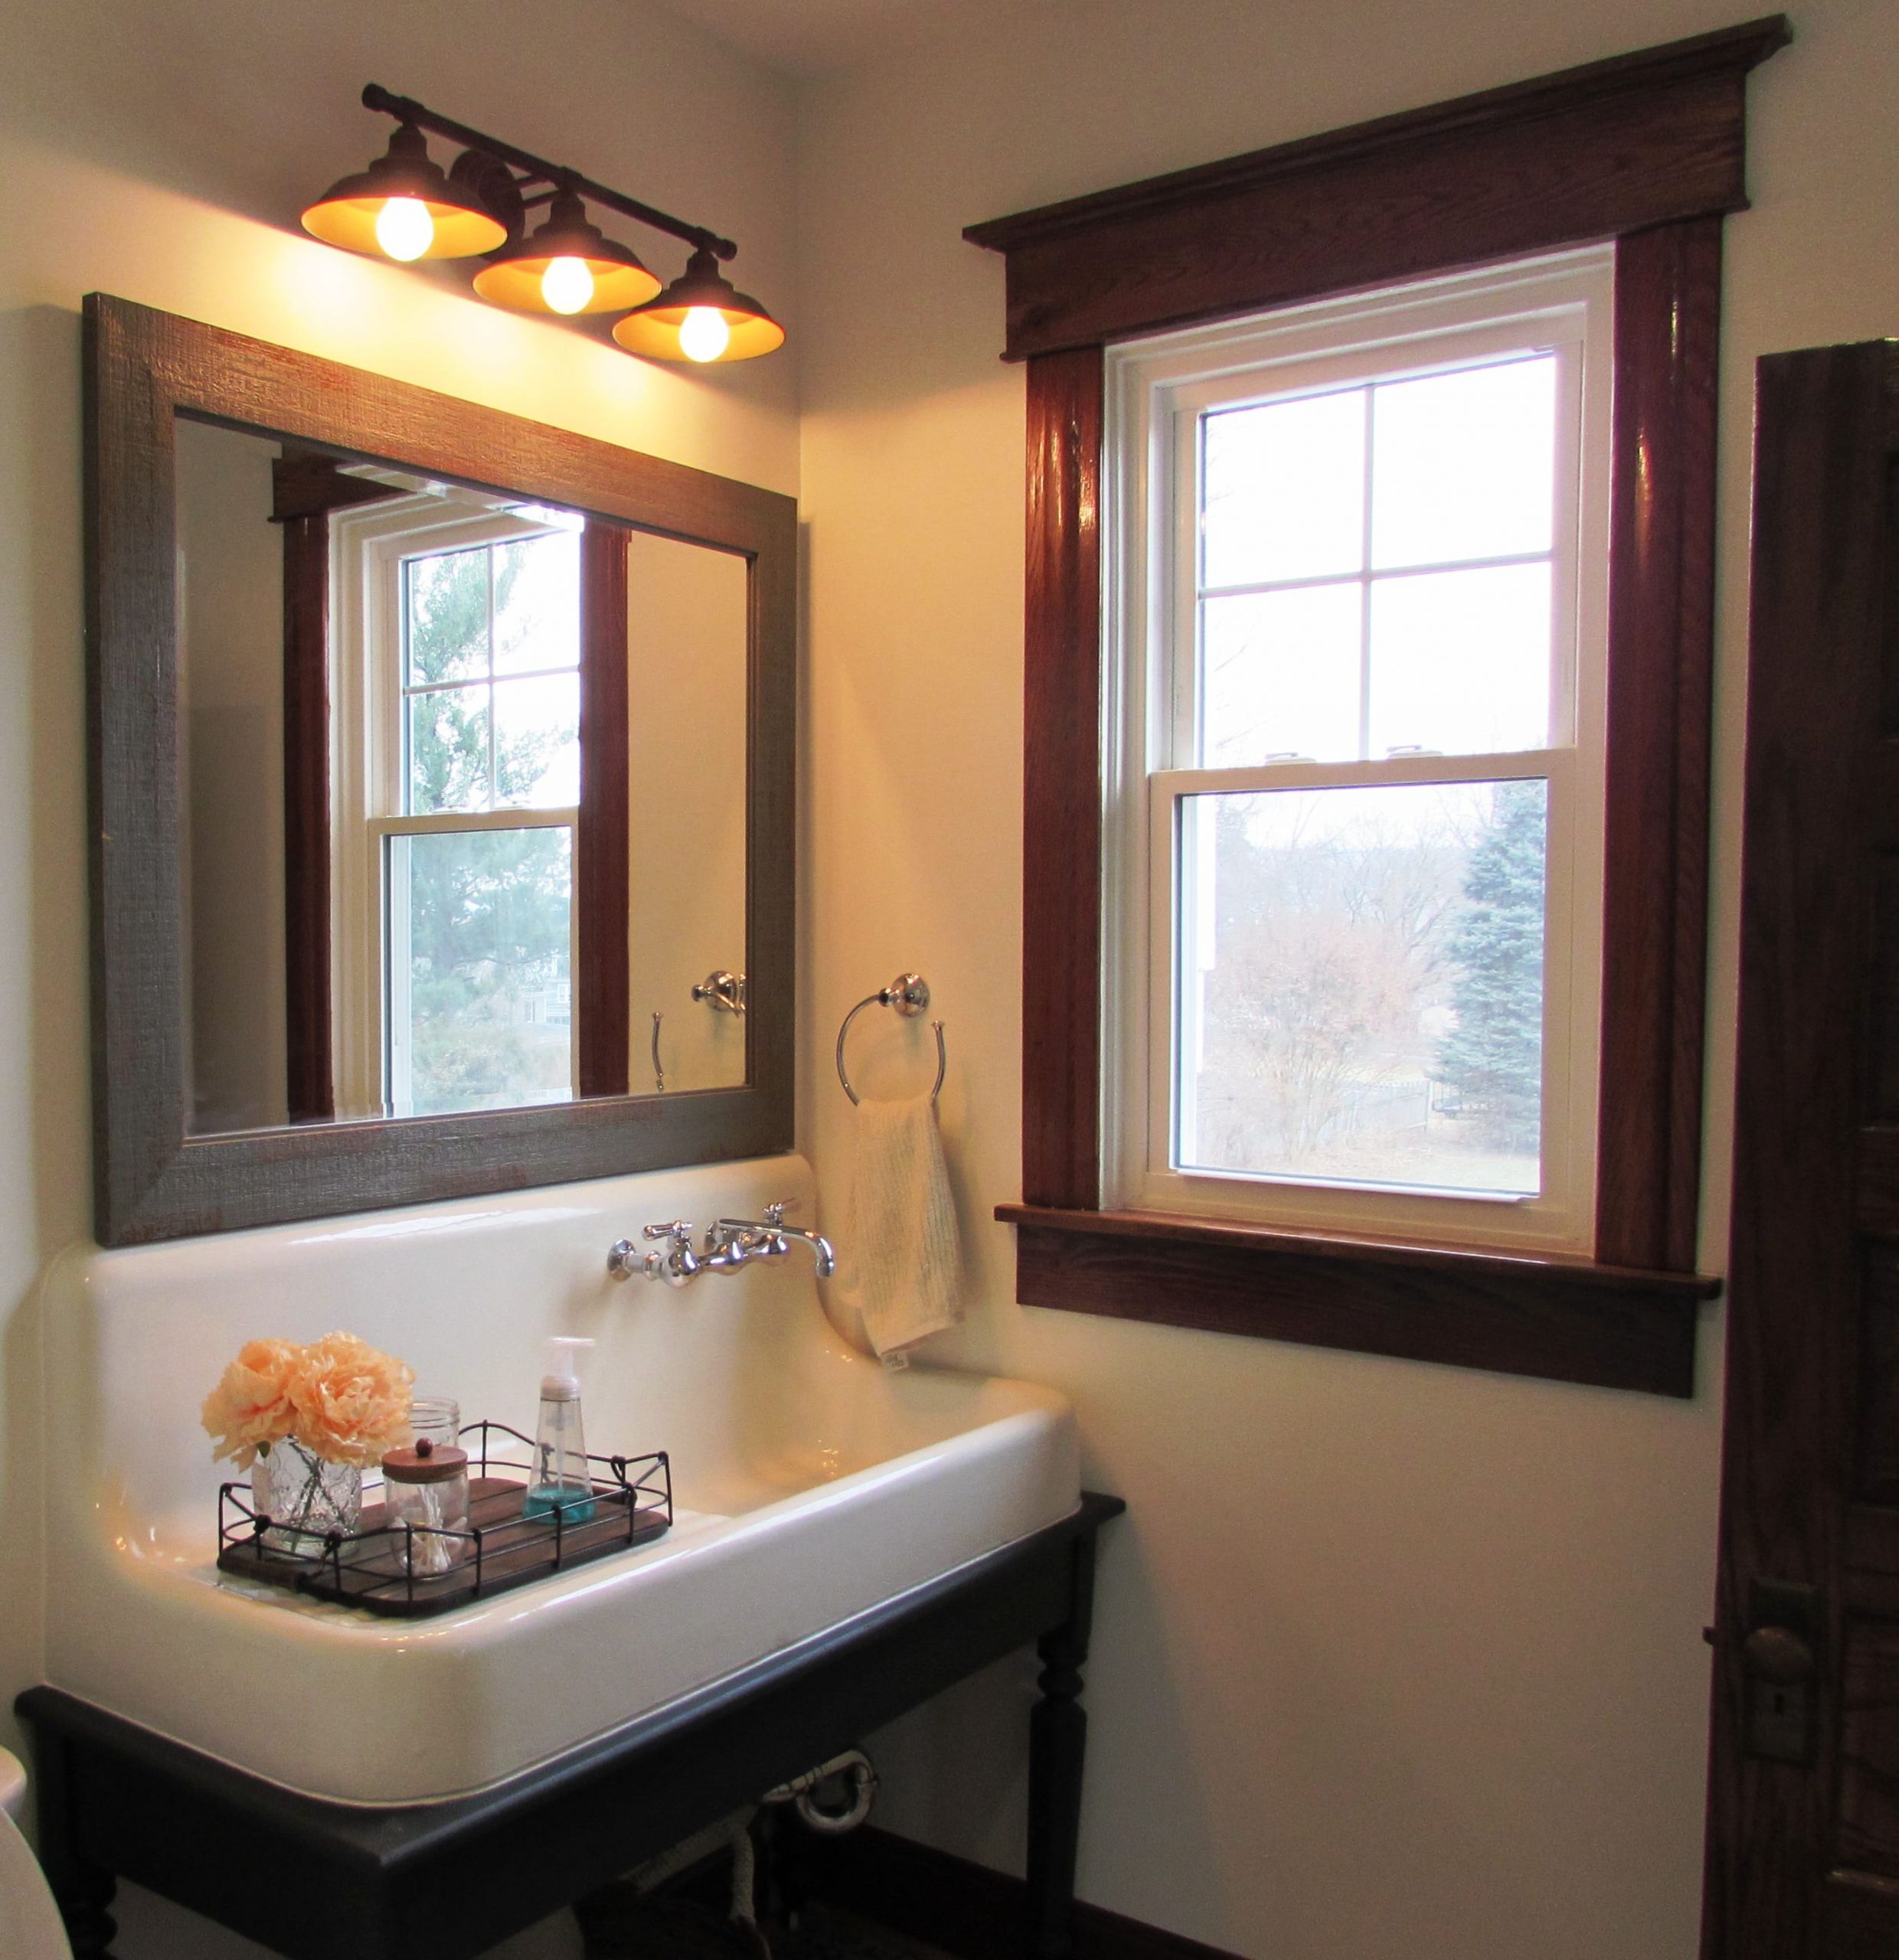 Bathroom Remodeling Maryland
 A Historic home in Middletown MD has all the bathrooms